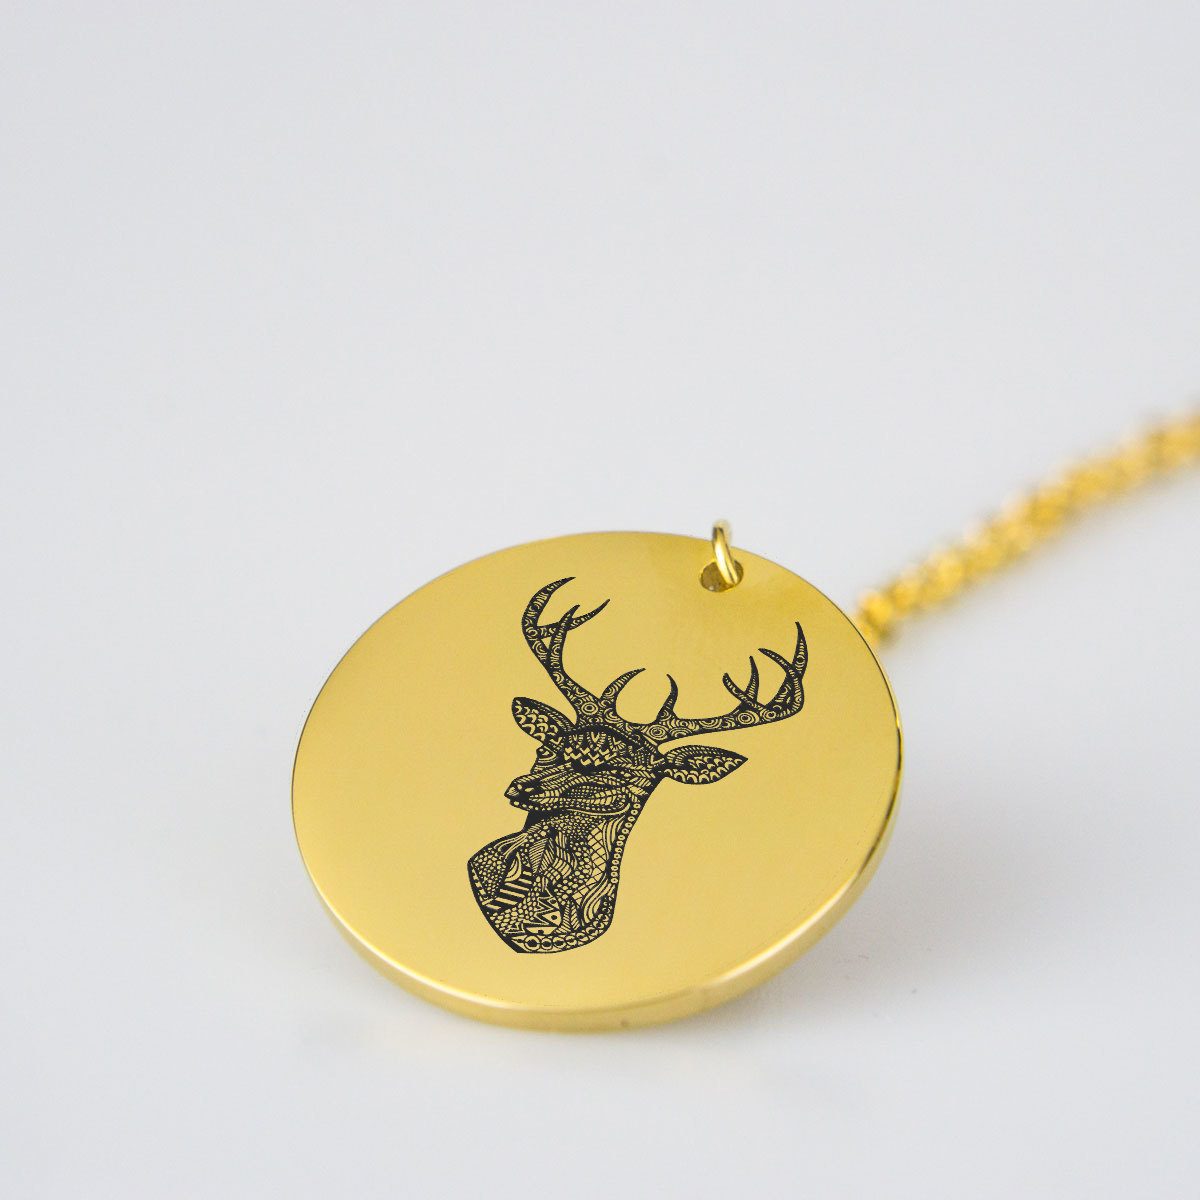 Lovely Dear Engraved Charm Necklace